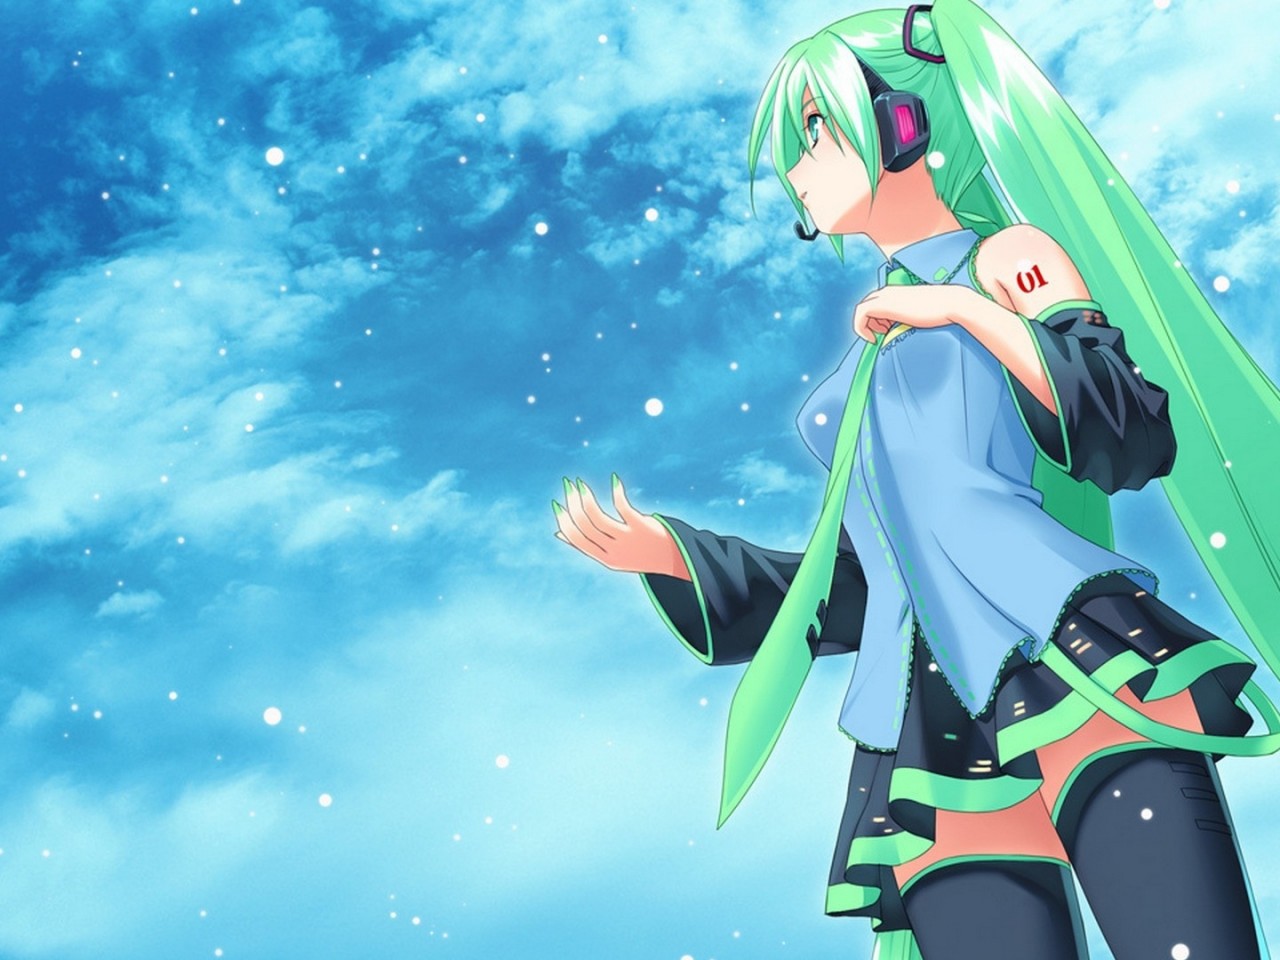 Green Haired Hd Anime Girl Wallpaper Hd Wallpapers